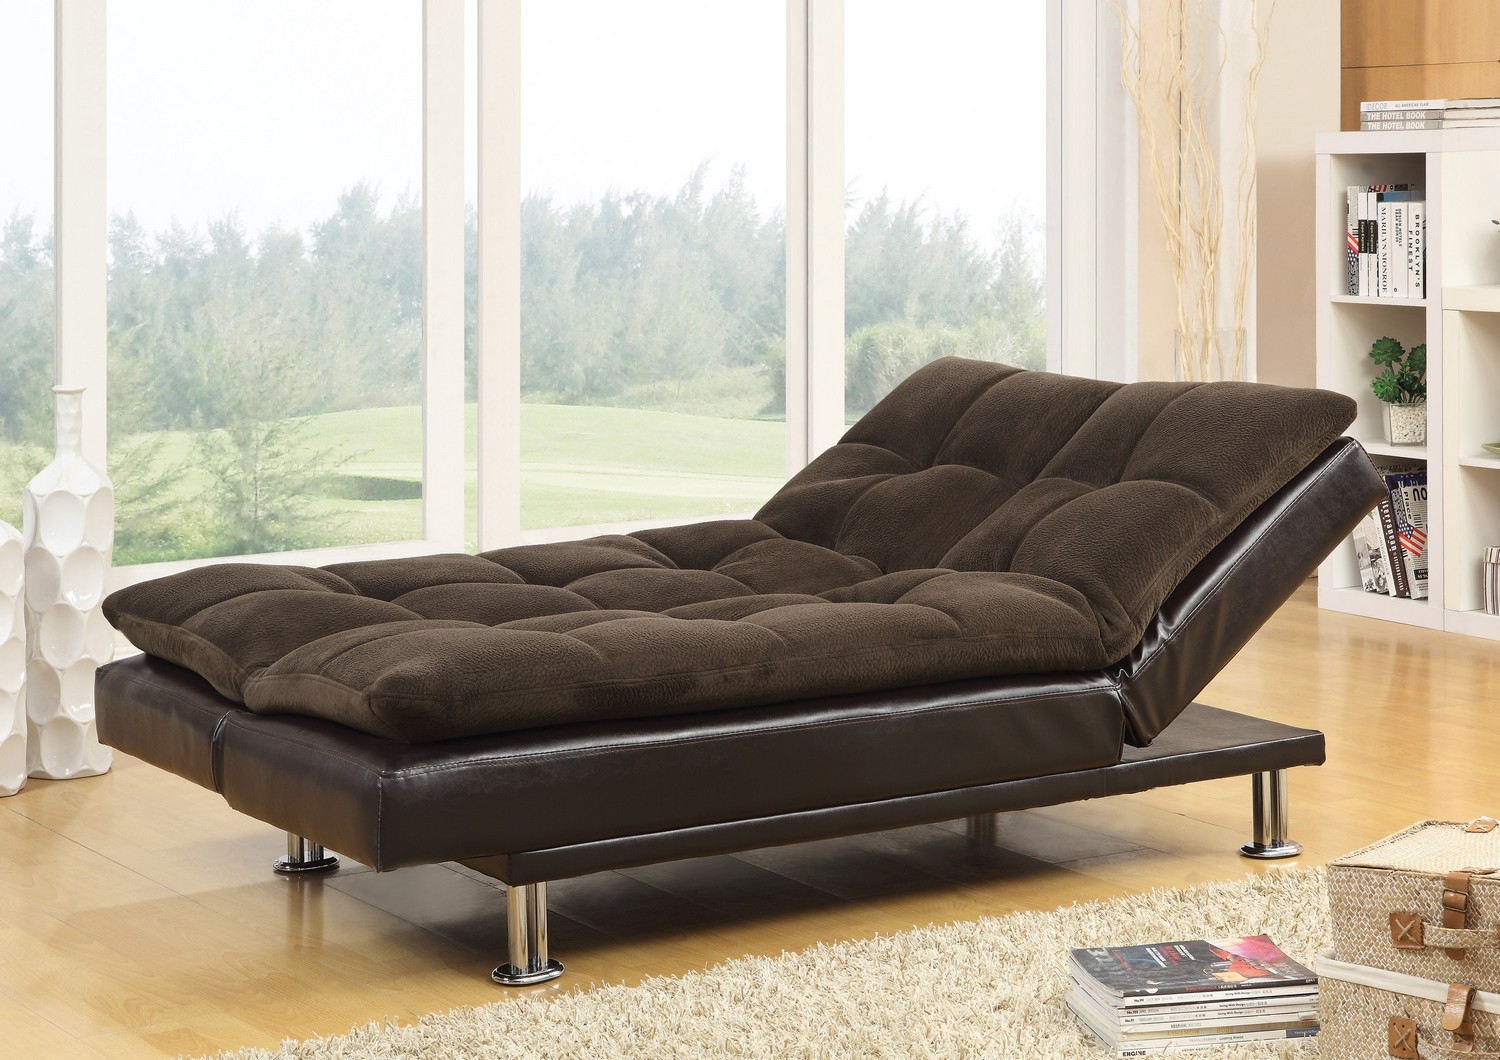 Coaster 300313 Sofa Bed - Two-toned Brown